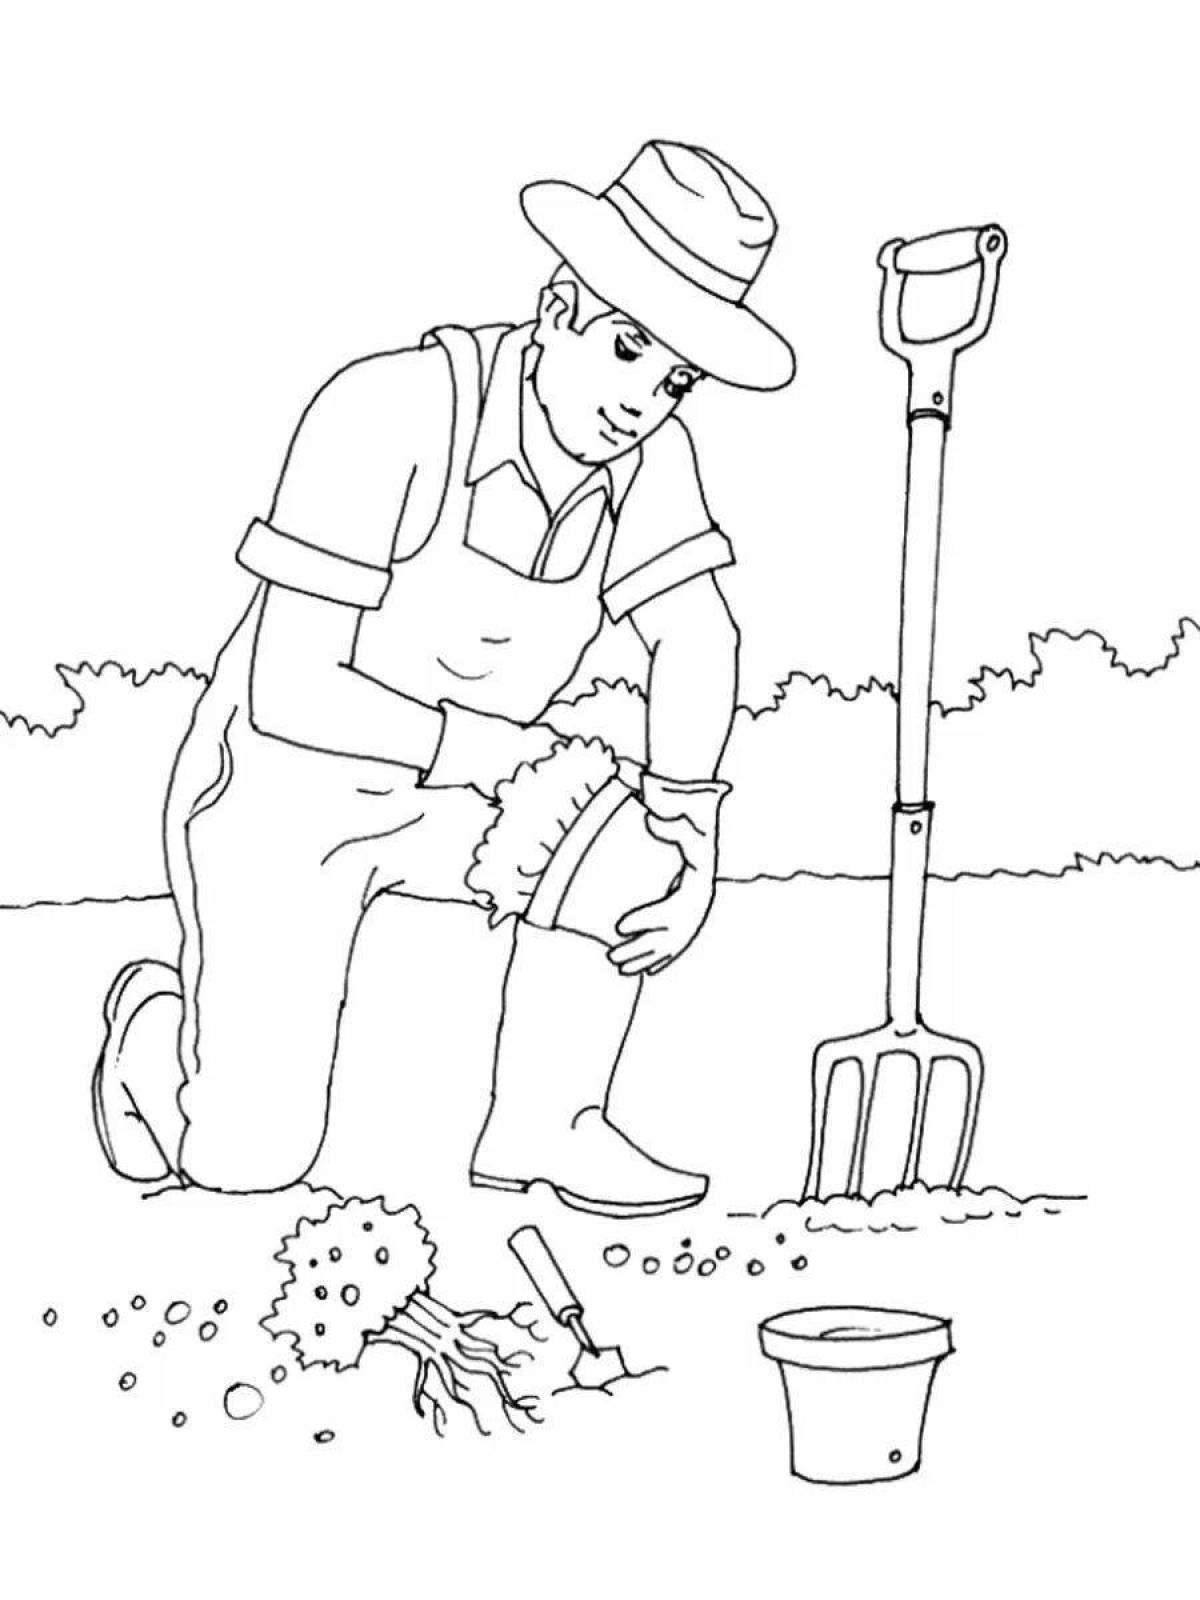 Charming gardener coloring page